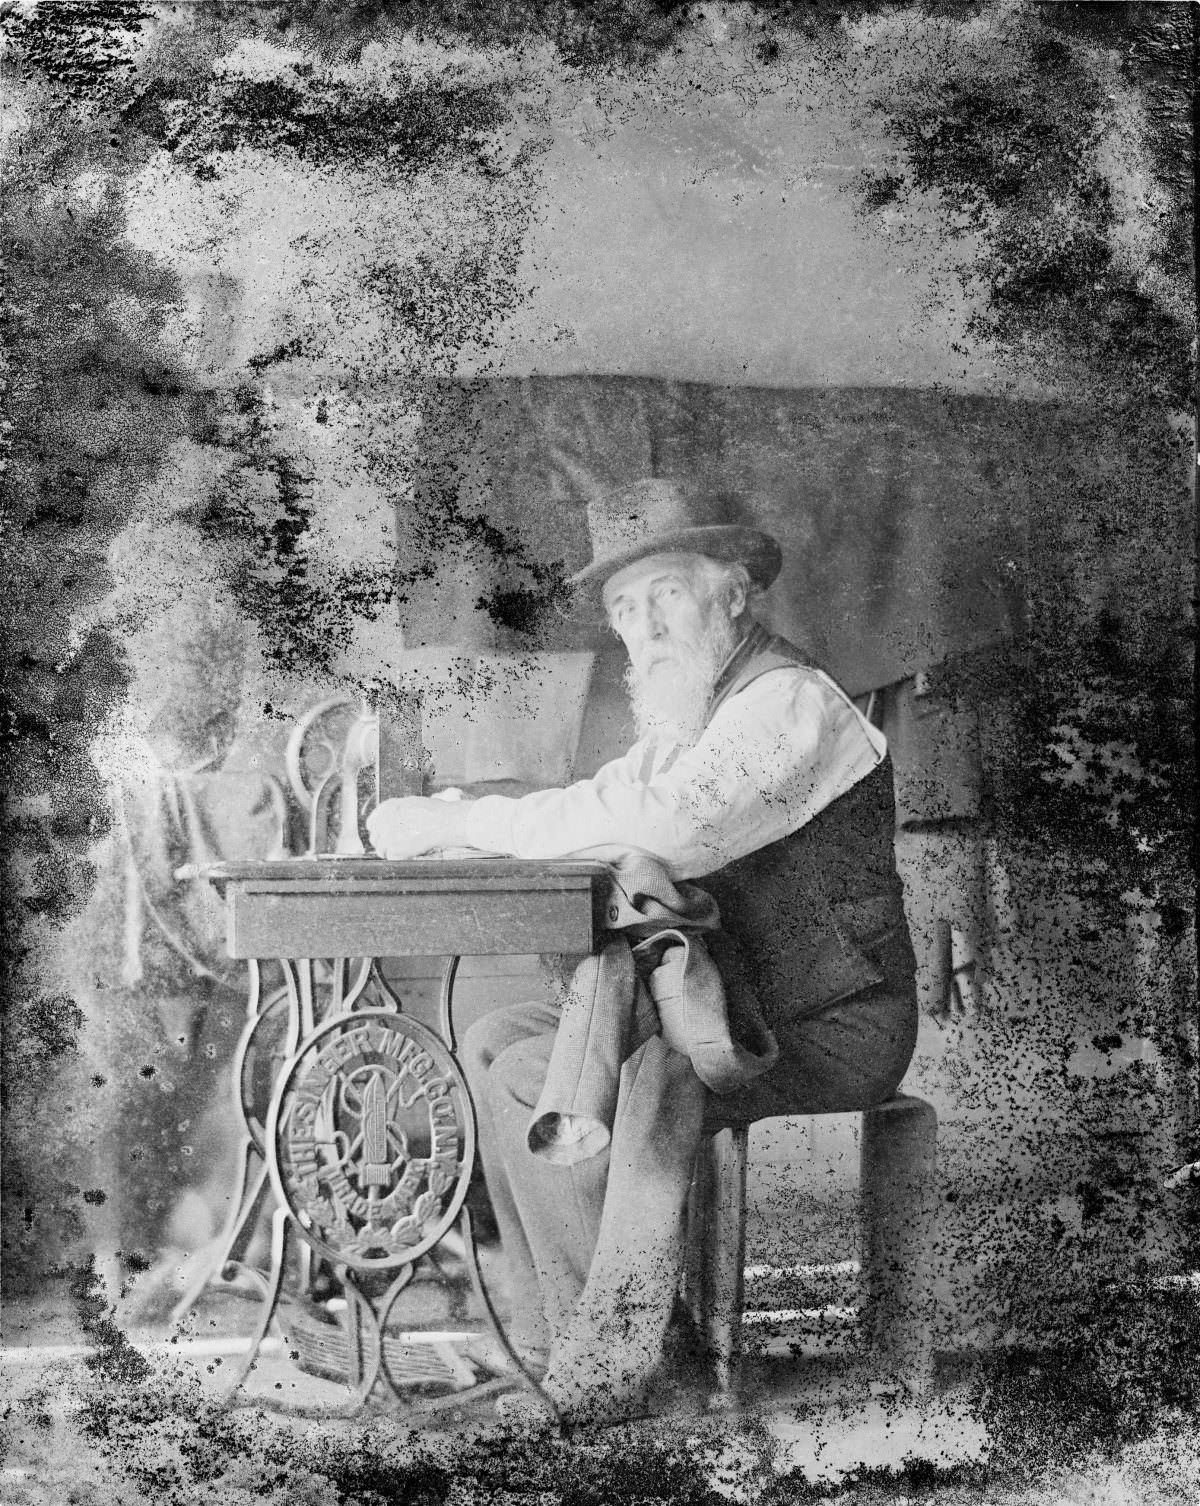 Man working at sewing machine – George Silas Duntley Photographs 1899-1918